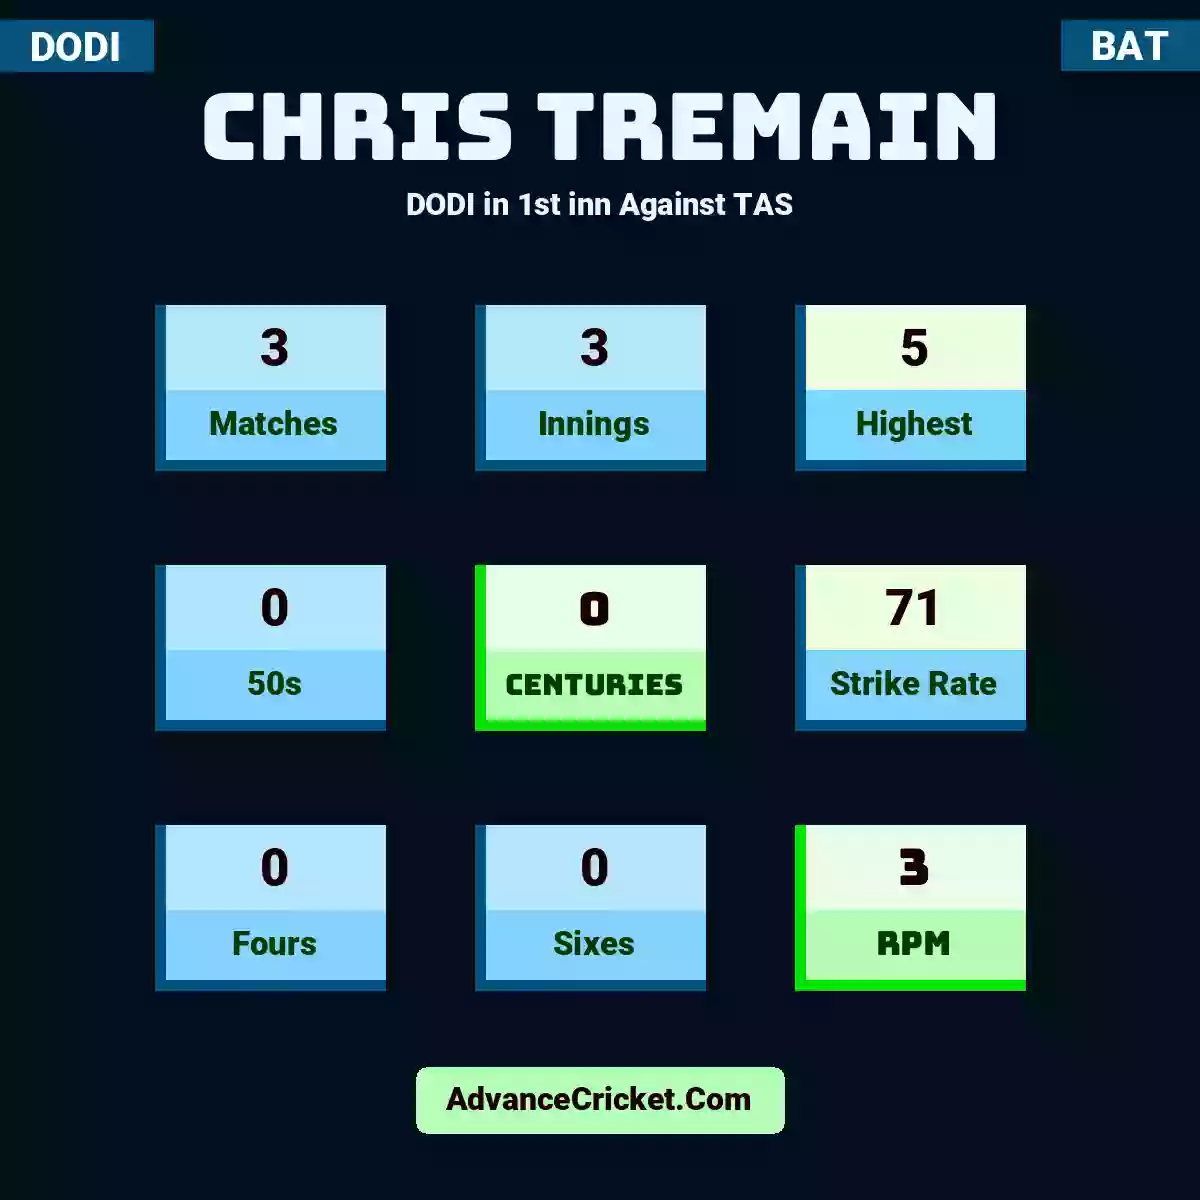 Chris Tremain DODI  in 1st inn Against TAS, Chris Tremain played 3 matches, scored 5 runs as highest, 0 half-centuries, and 0 centuries, with a strike rate of 71. C.Tremain hit 0 fours and 0 sixes, with an RPM of 3.